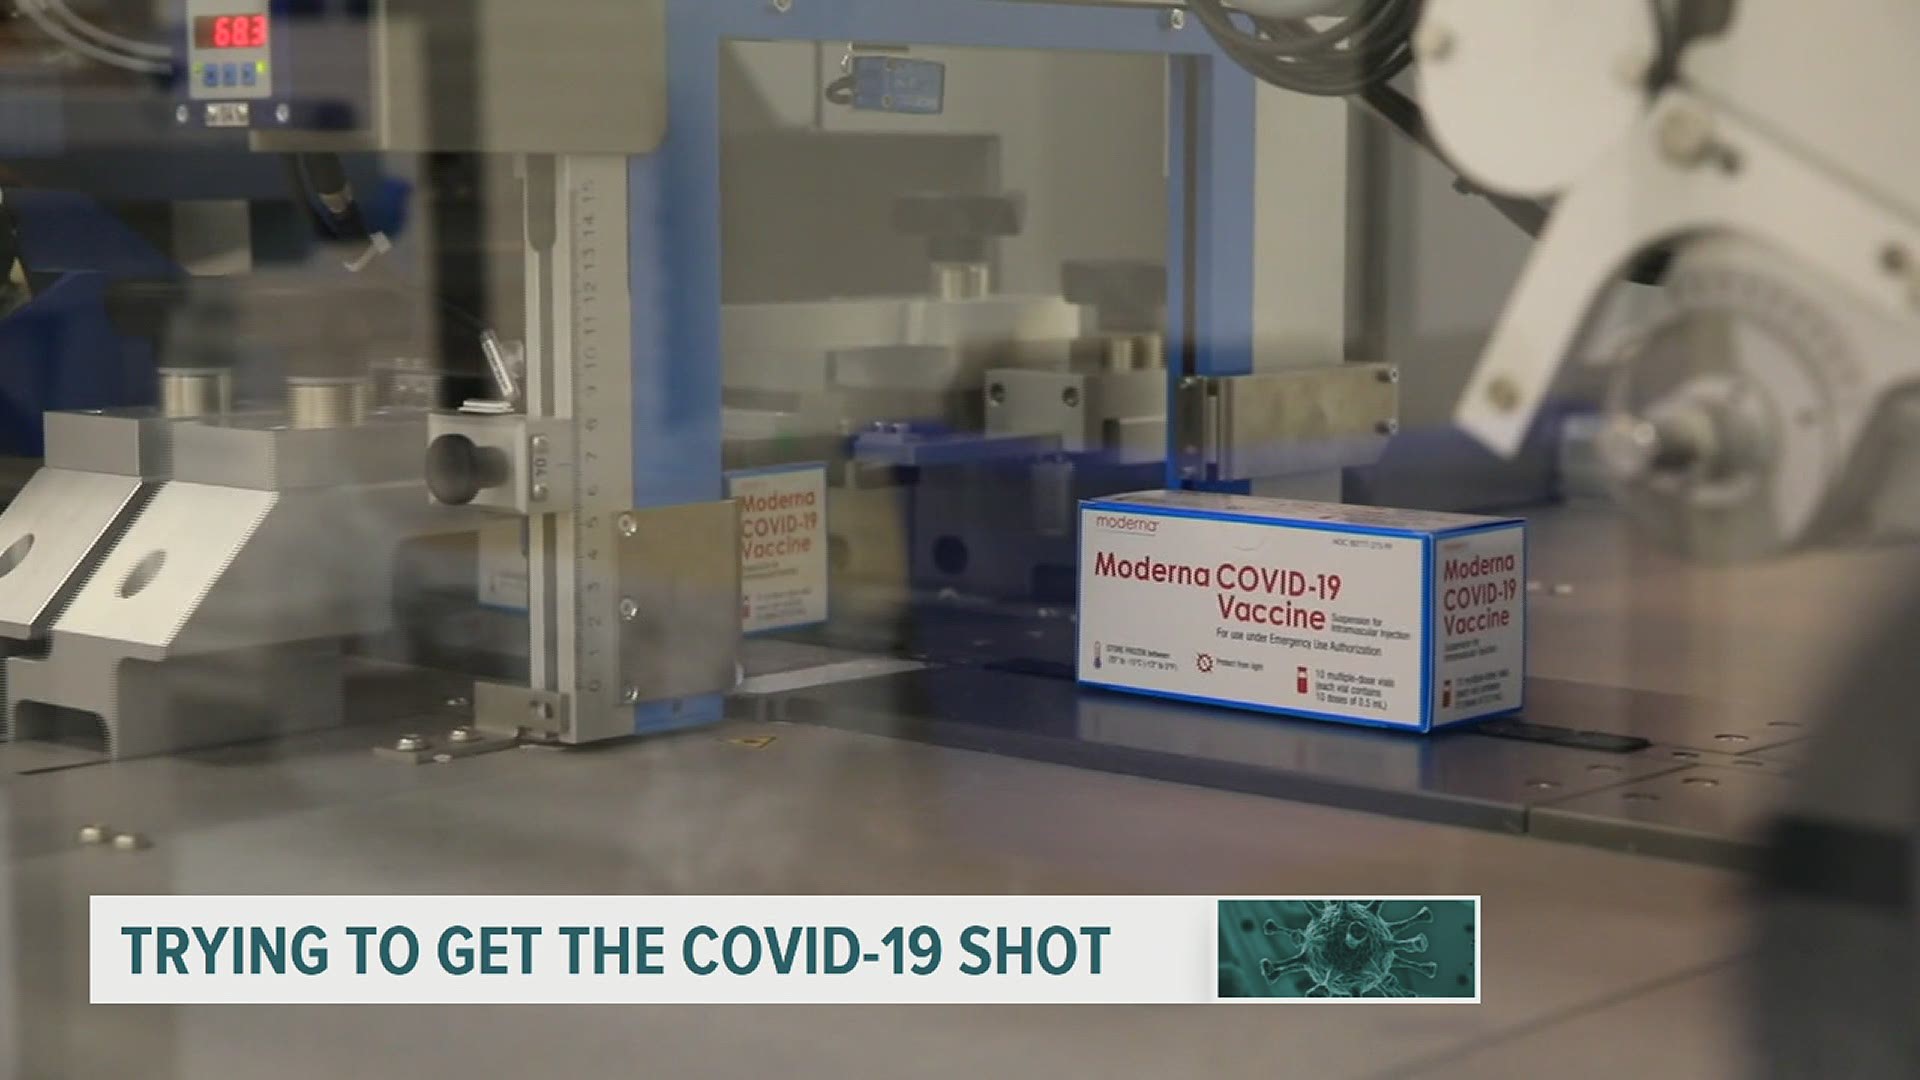 Nearly 4 million people are currently eligible to receive the COVID-19 shot in PA, but the state has only received around 1.6 million doses in total so far.